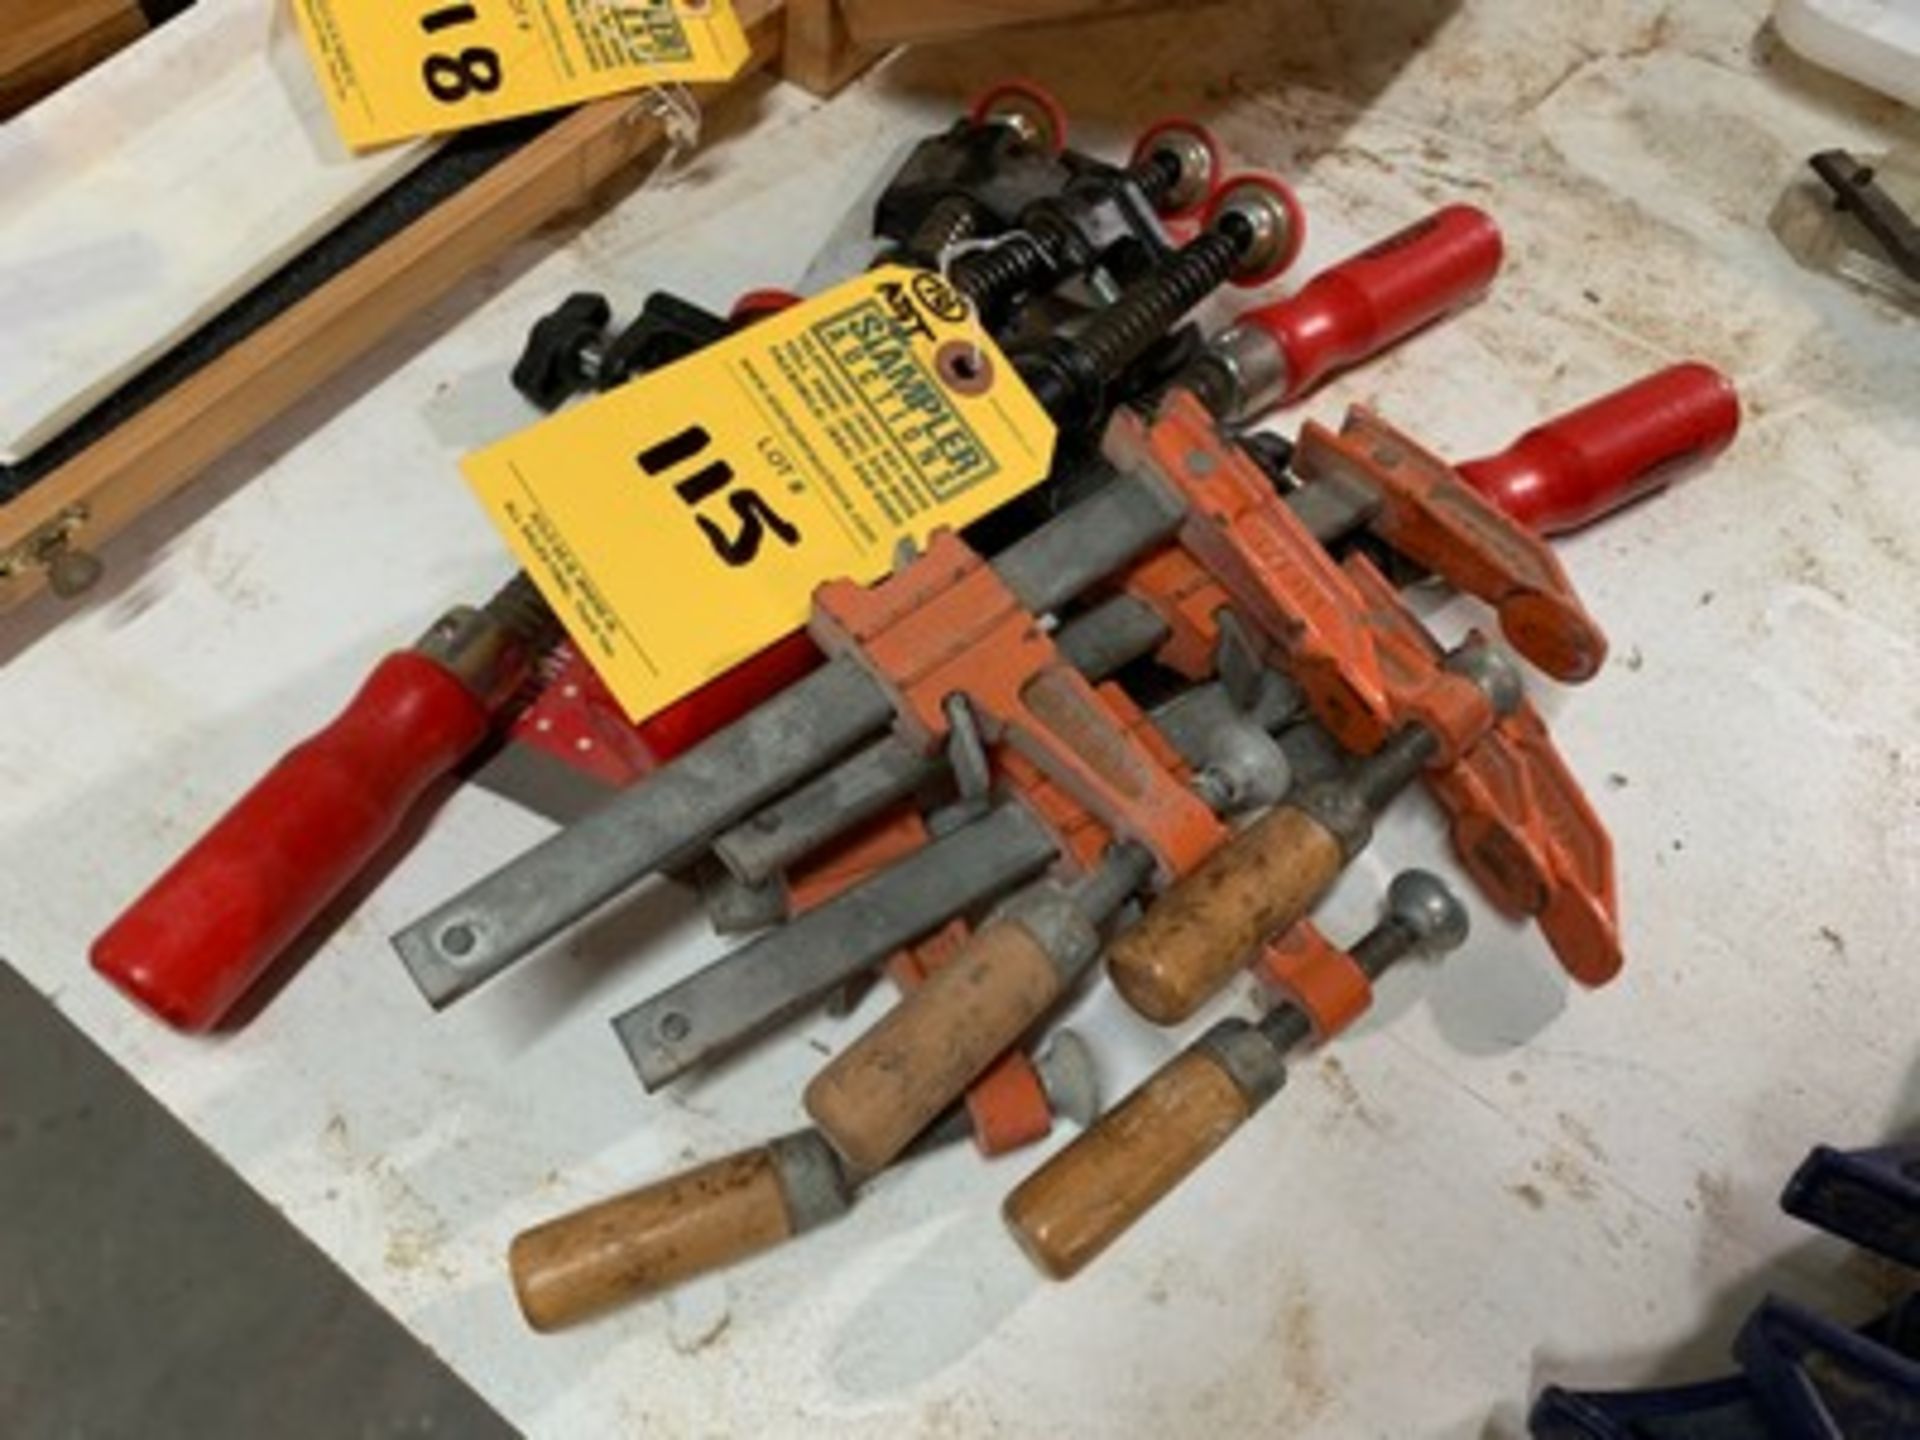 SMALL FLAT CLAMPS - BESSEY, ETC